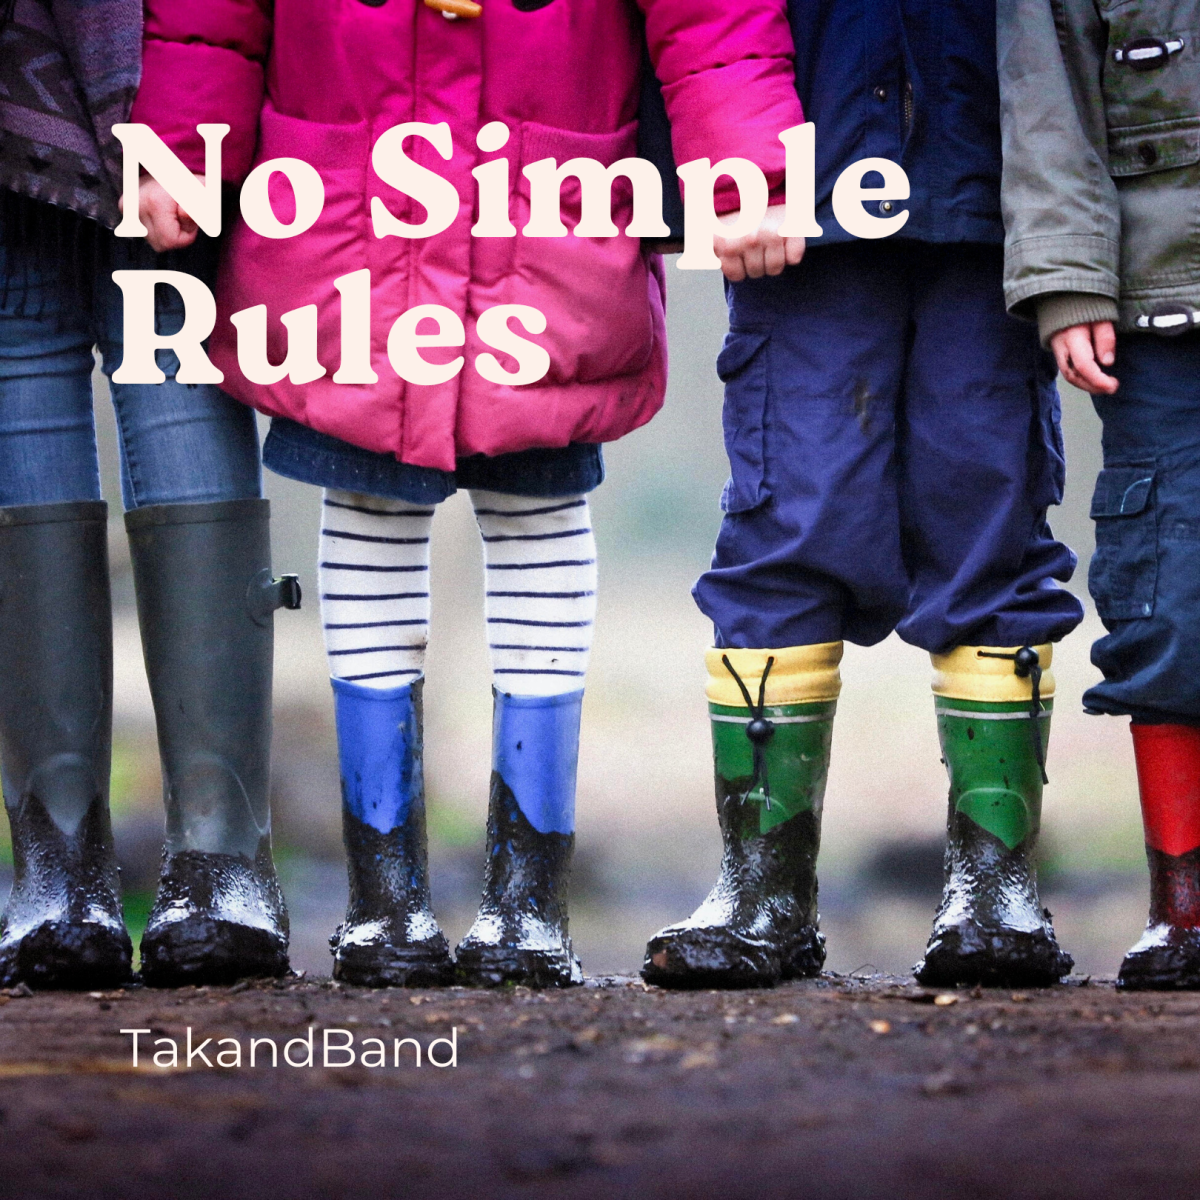 New Song: No Simple Rules